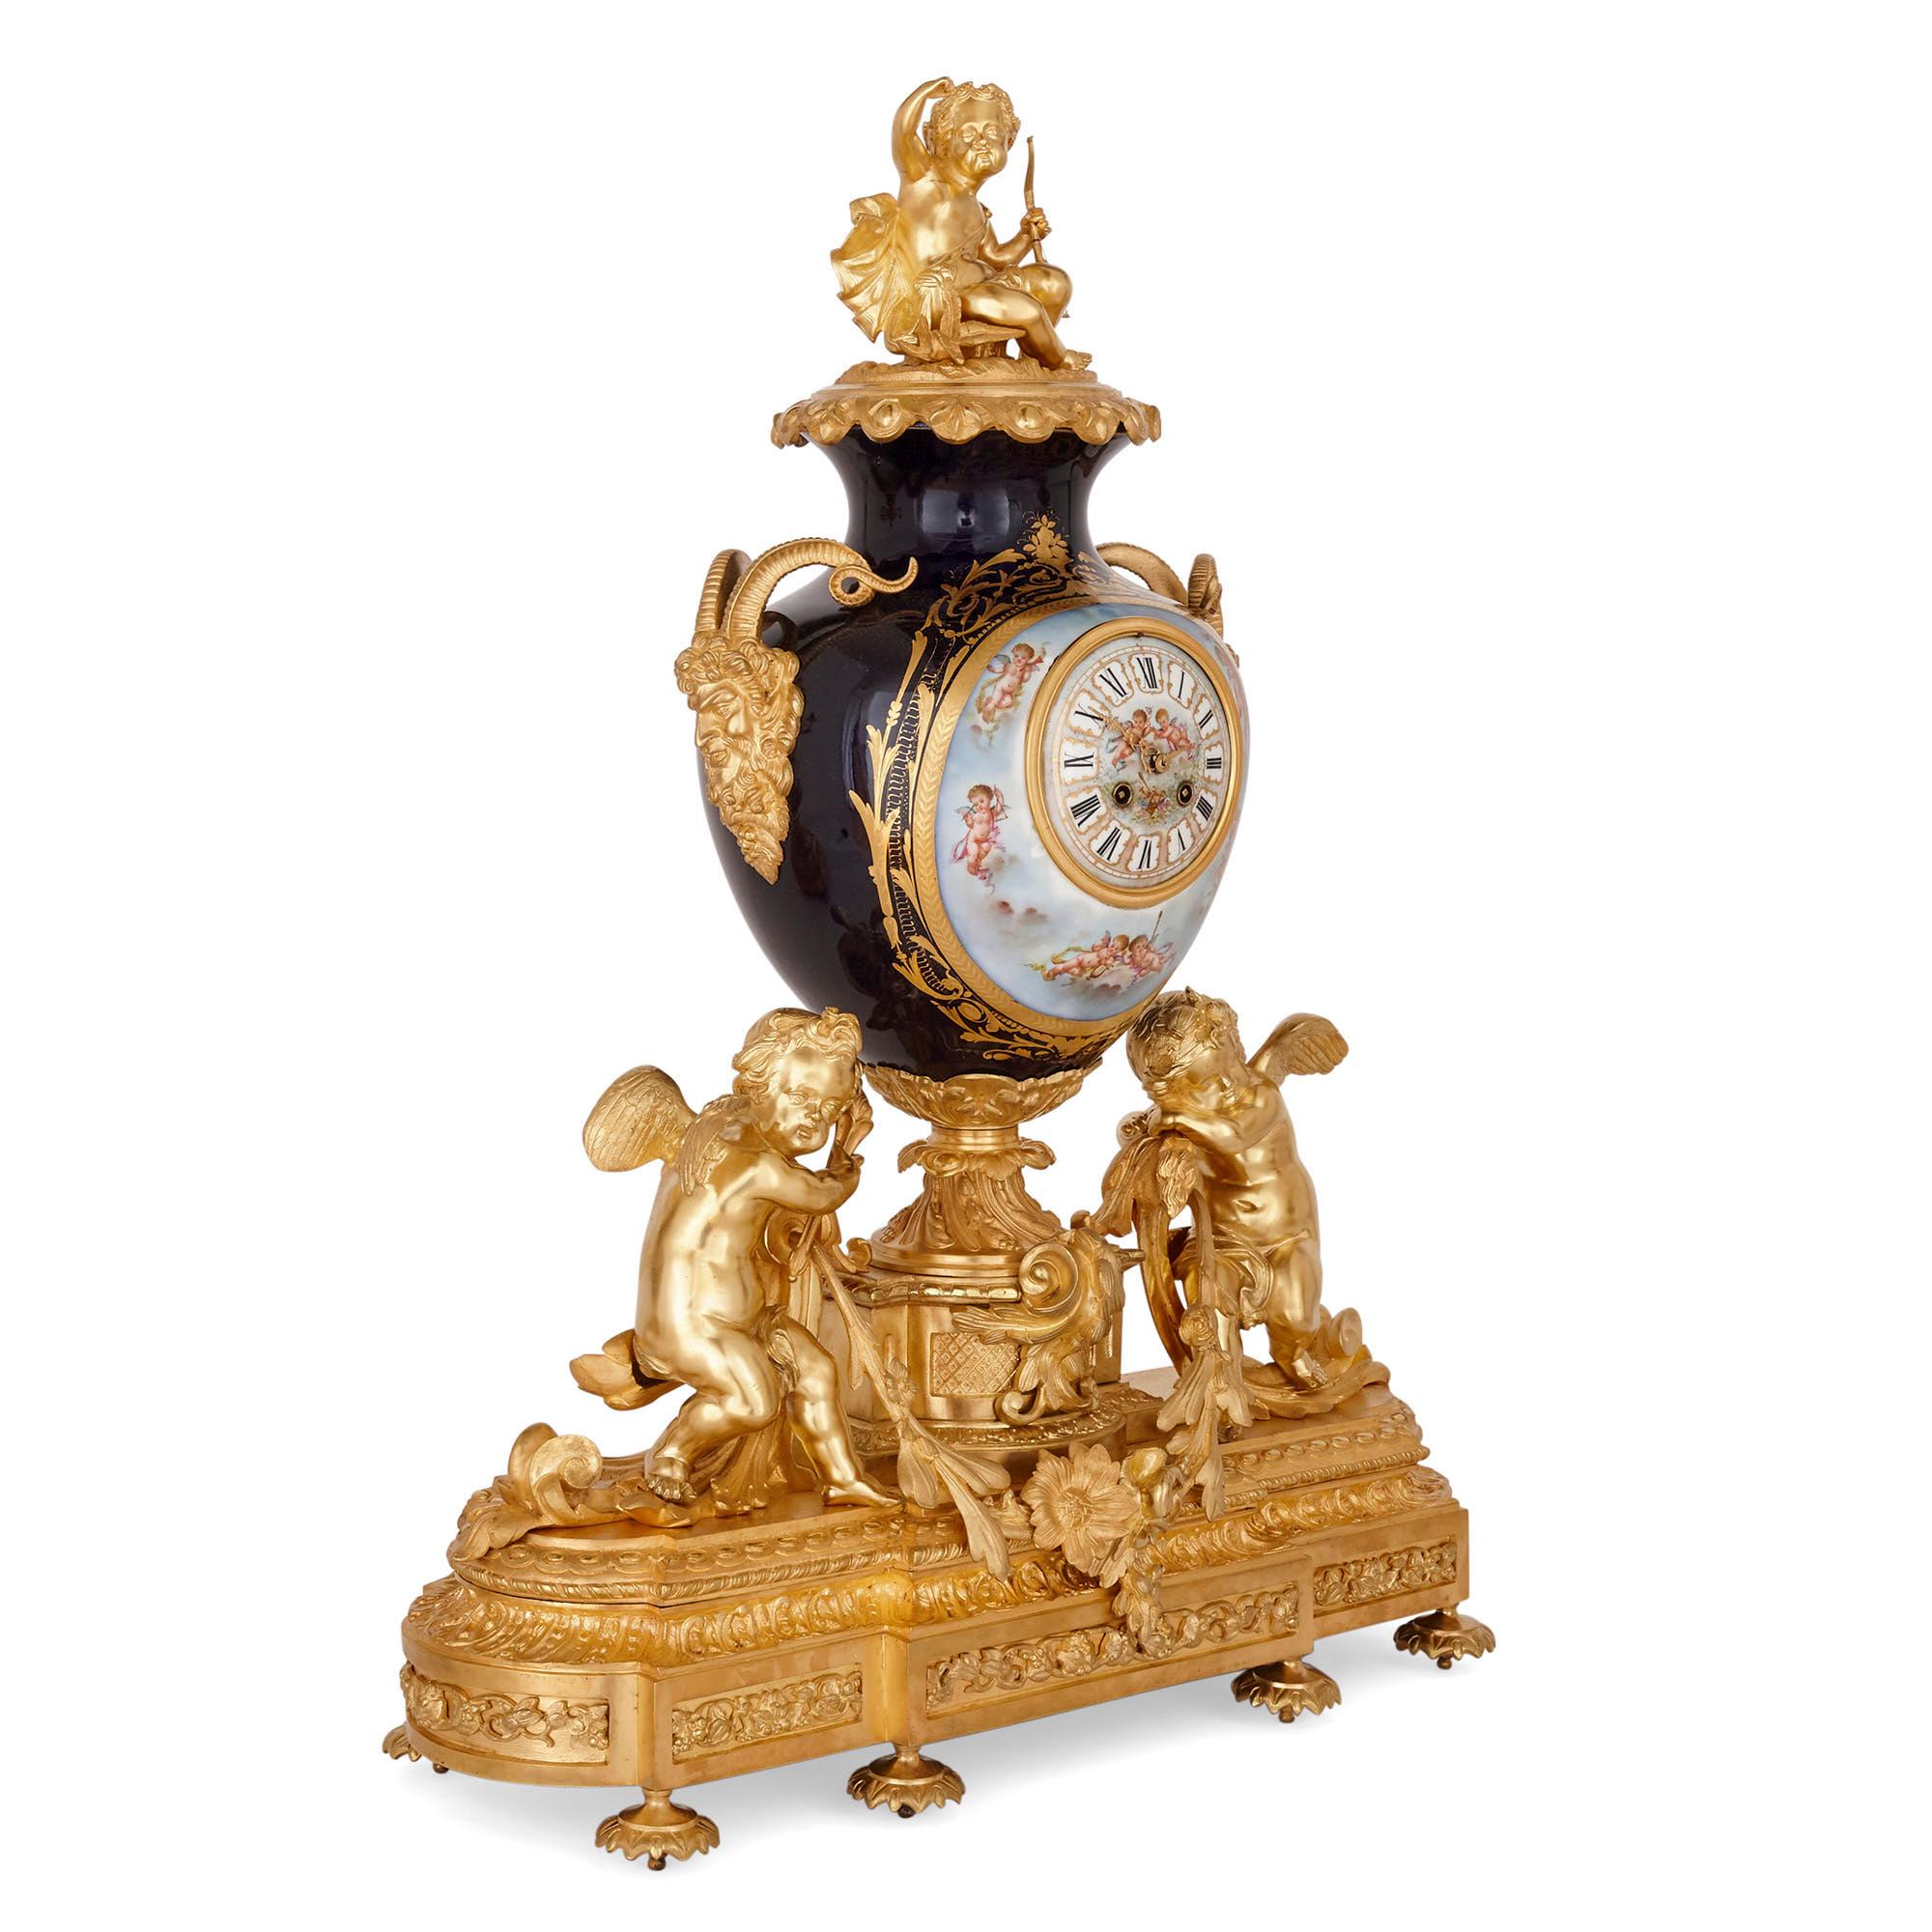 Three-piece Louis XV Rococo style porcelain and ormolu clock set
French, late 19th century
Clock: Height 82cm, width 62, depth 28cm
Candelabra: Height 76cm, diameter 22cm

Comprising of a mantel clock and pair of candelabra, this three-piece